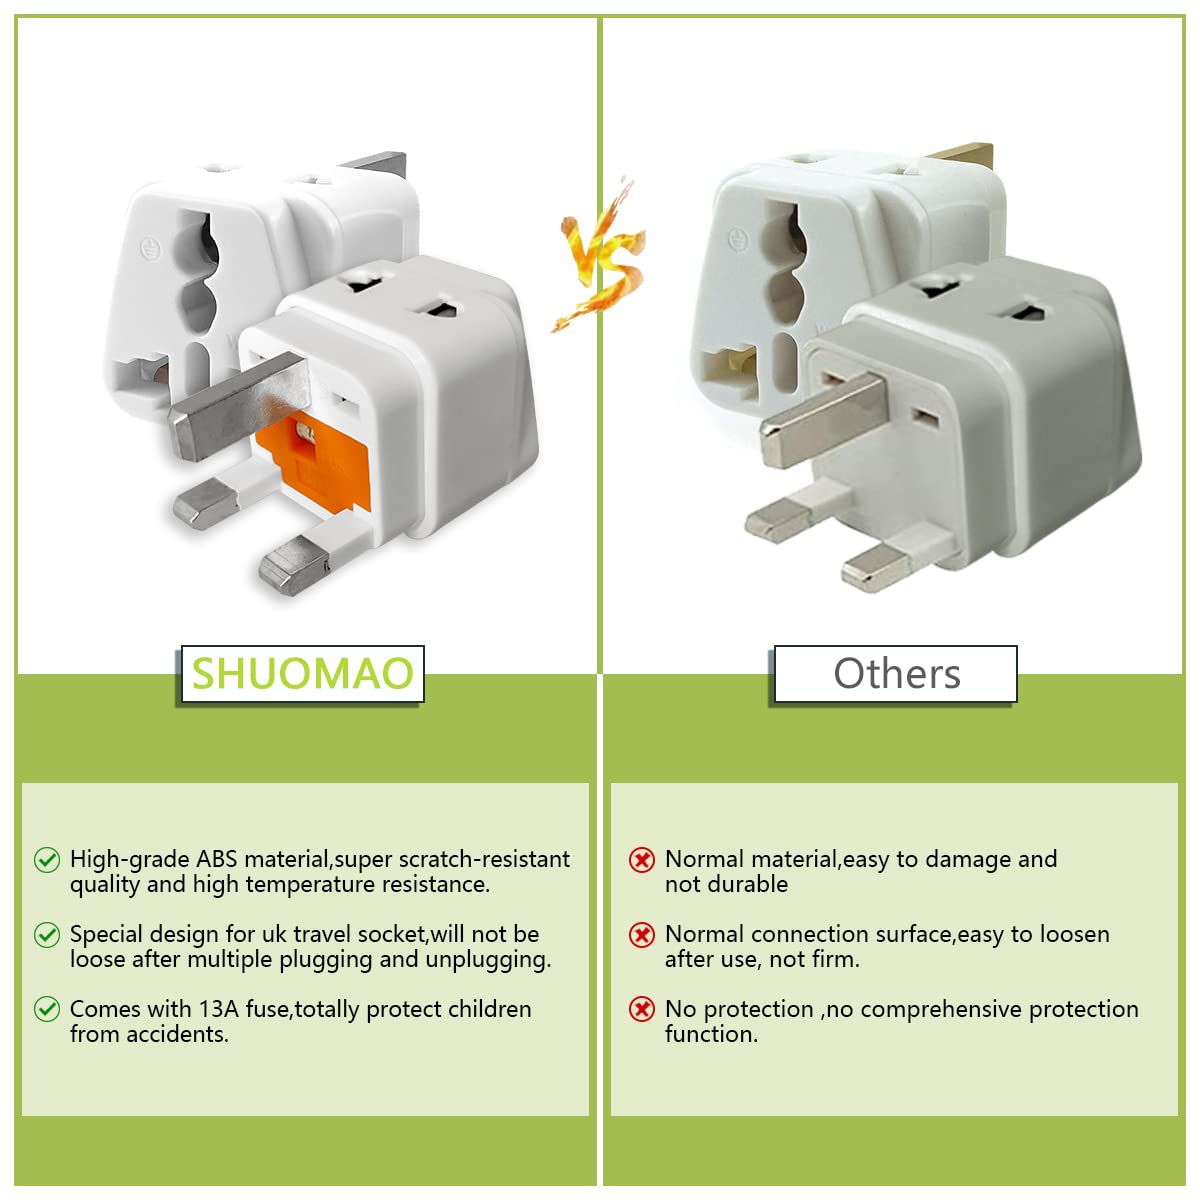 3-PACK UK Travel Adapter,SHUOMAO EU/US to UK Plug Adaptor with 13A Fuse,2 Pin to 3 Pin Converter Plug Adapter for Shaver/Toothbrush,Laptop(European/USA/Indian/Itatly/Swiss to UK Plug Adapter)